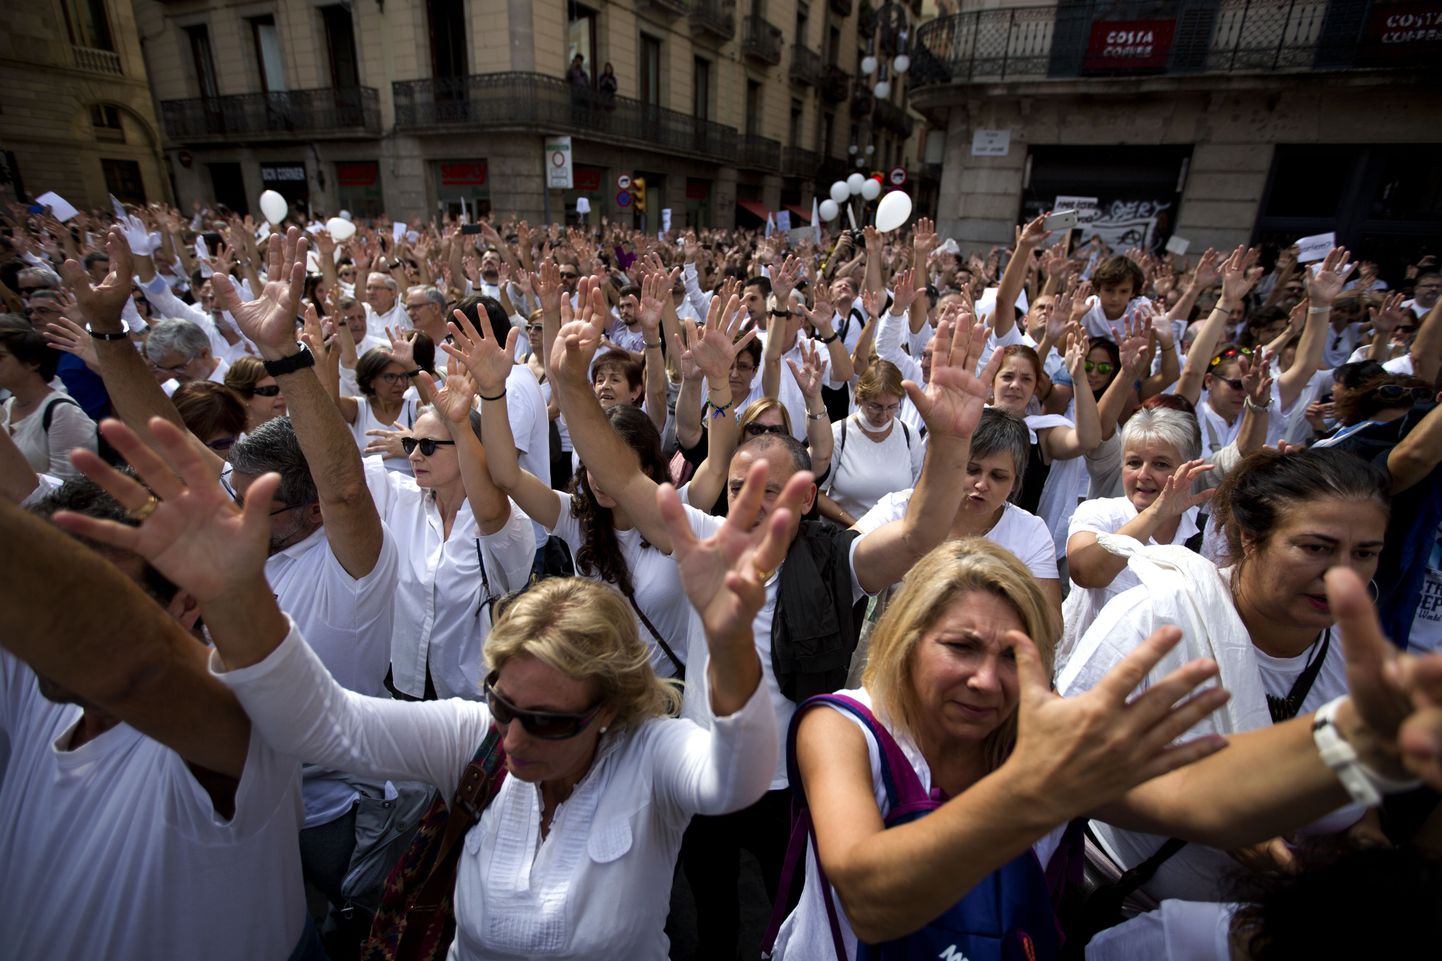 People raise their hands during a protest in favor of talks and dialogue in Sant Jaume square in Barcelona, Spain, Saturday Oct. 7, 2017. Thousands gathered at simultaneous rallies in Madrid and Barcelona in a call for dialogue amid a political crisis caused by Catalonia's secession push. (AP Photo/Emilio Morenatti)